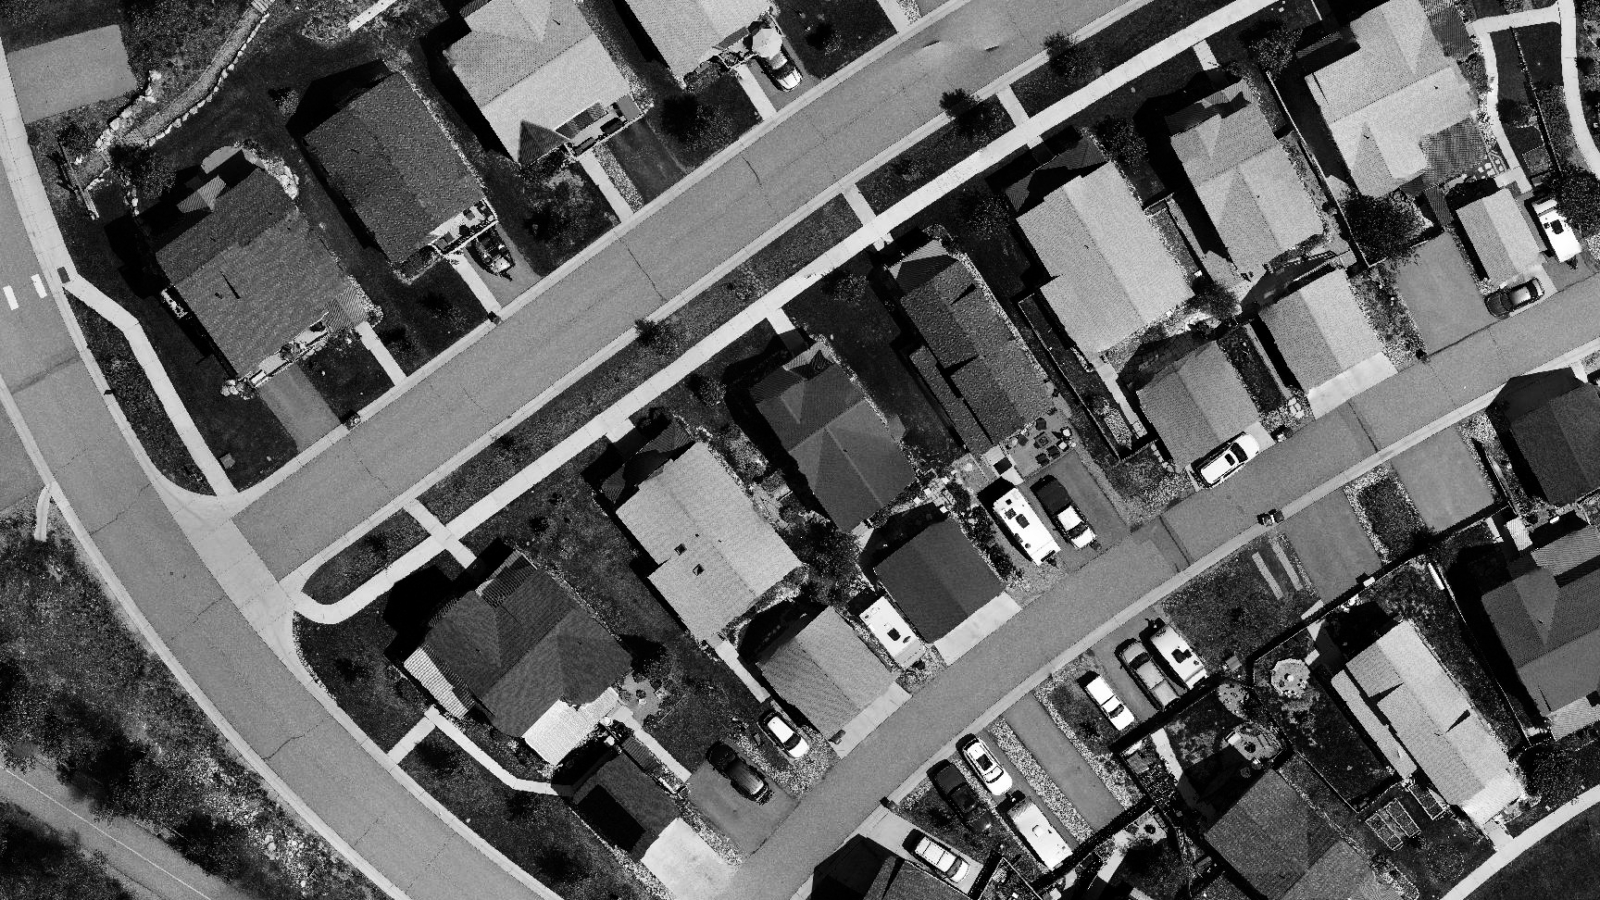 Planners designers communities and clients all benefit from drone-based visualization